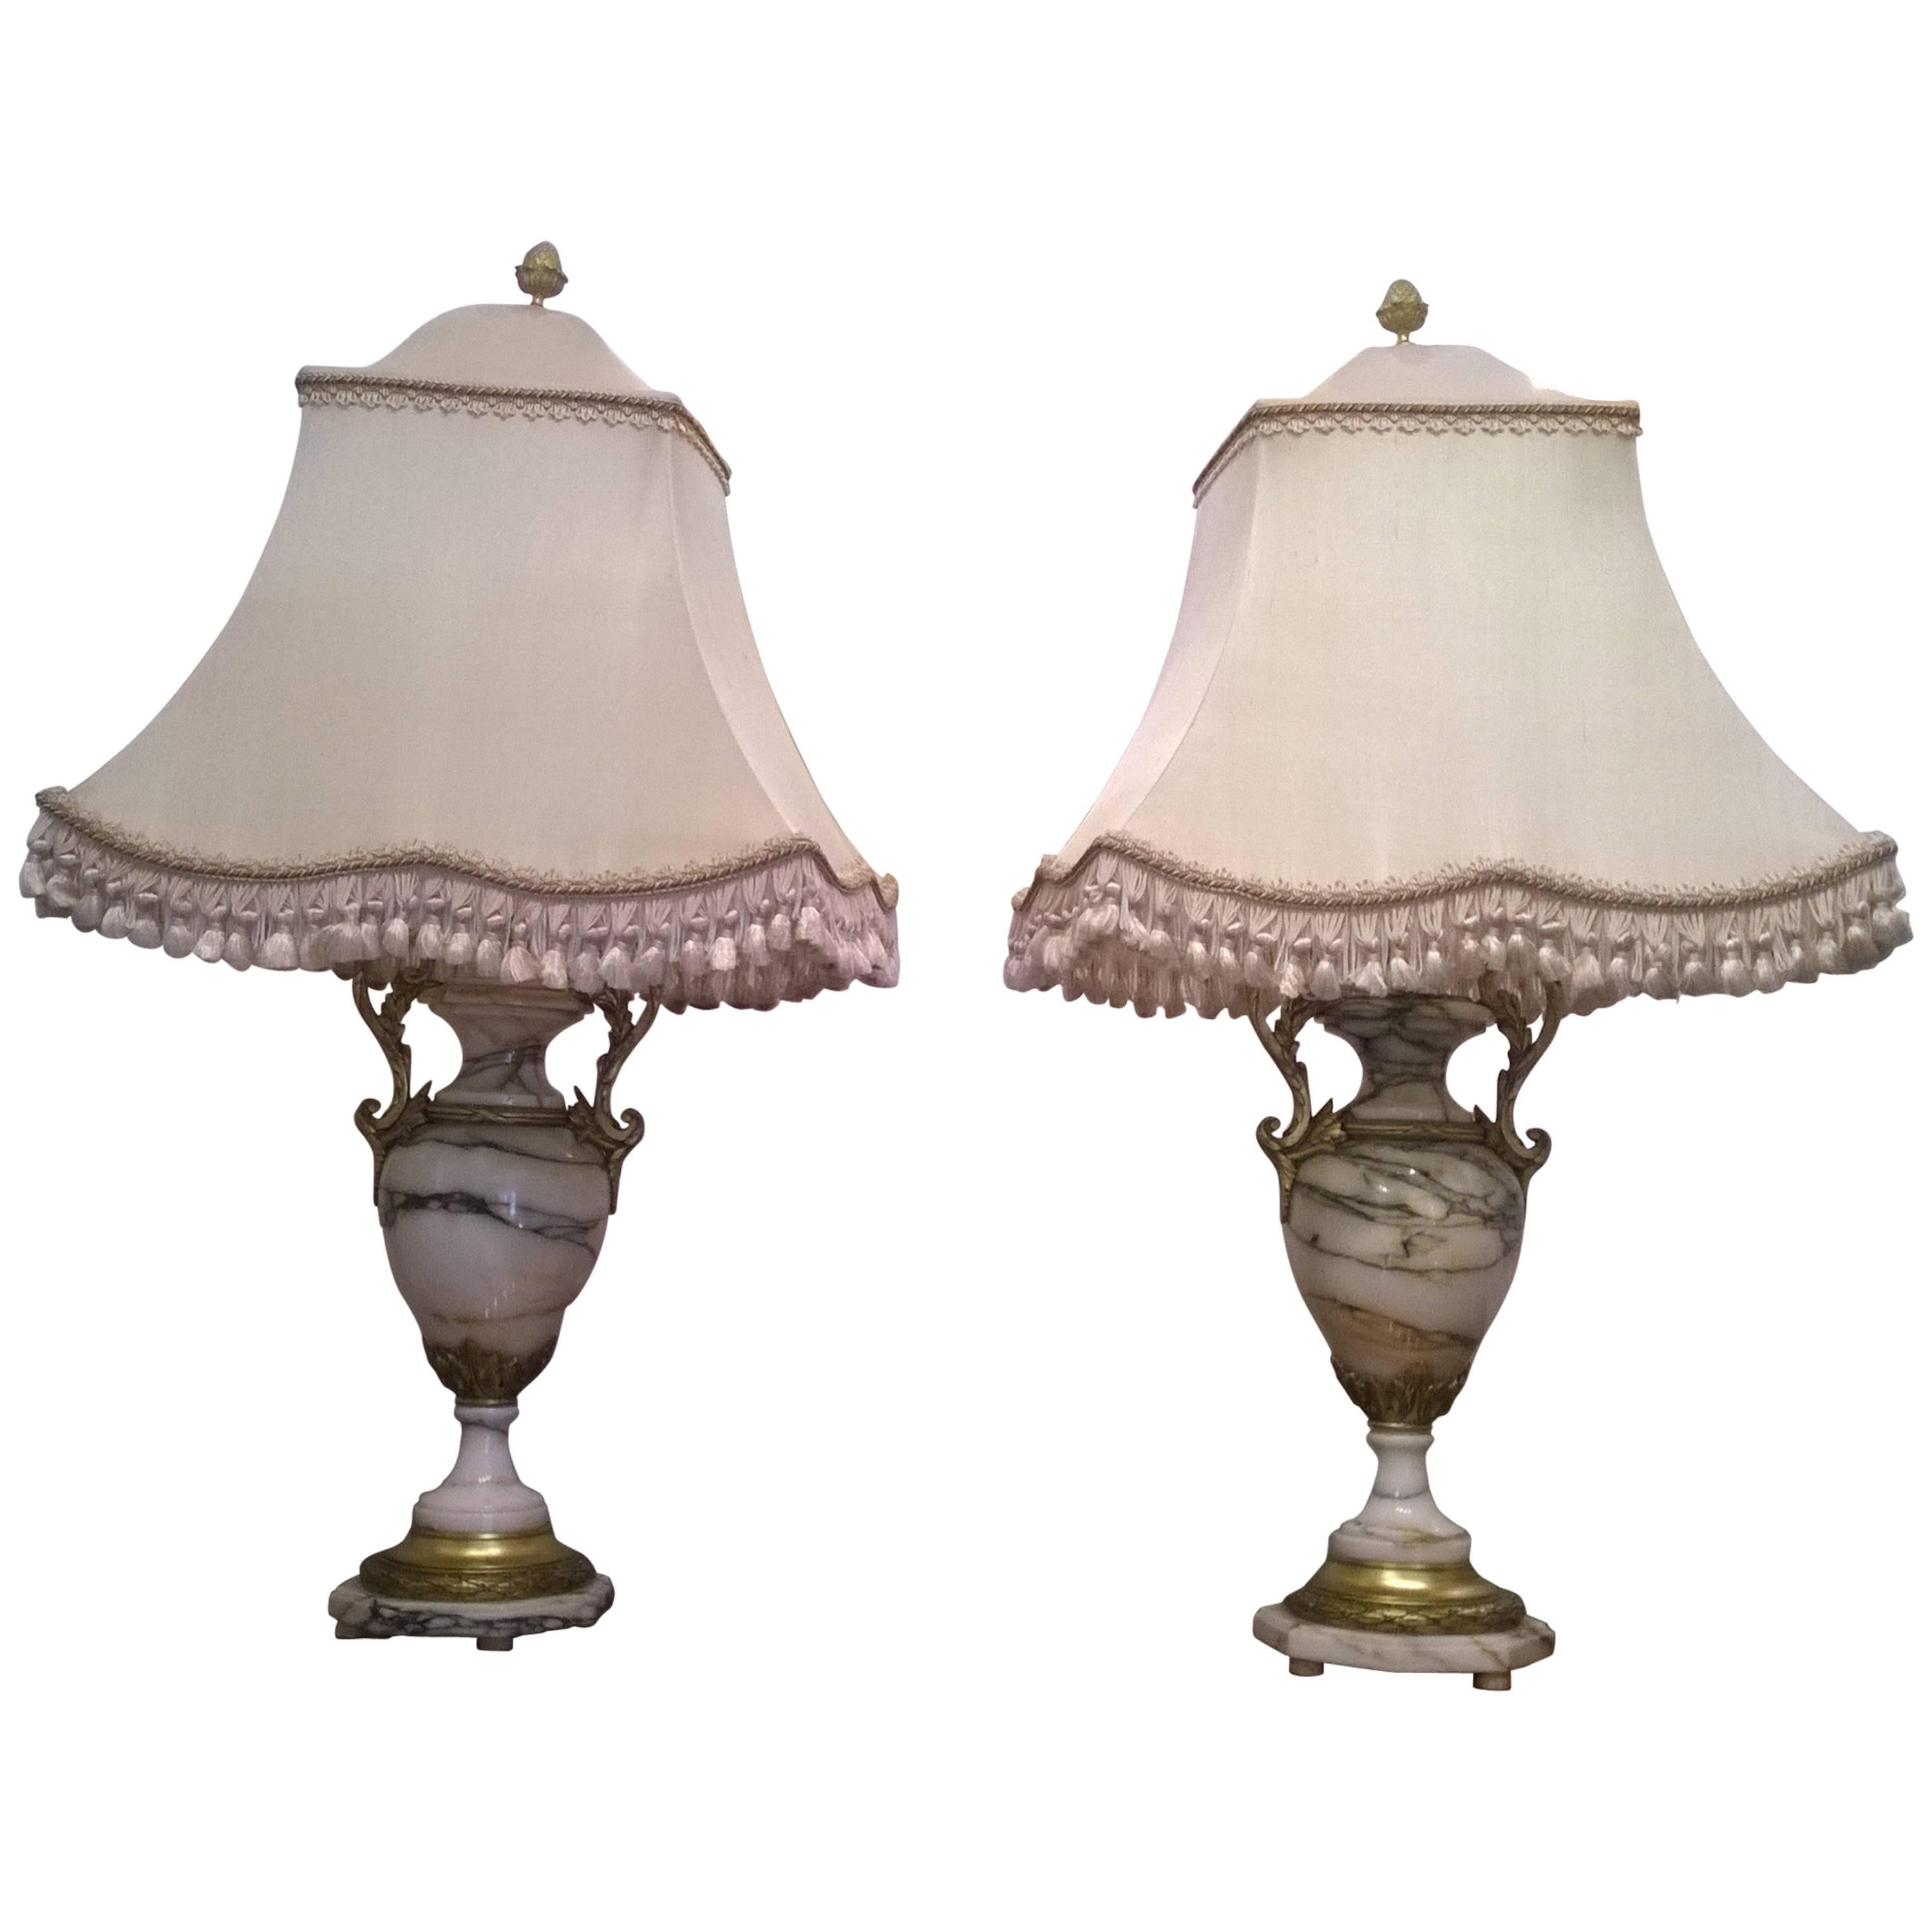 Victorian Marble and Gilt Metal Decorated Urns Converted to Electric Lamps, Pair For Sale